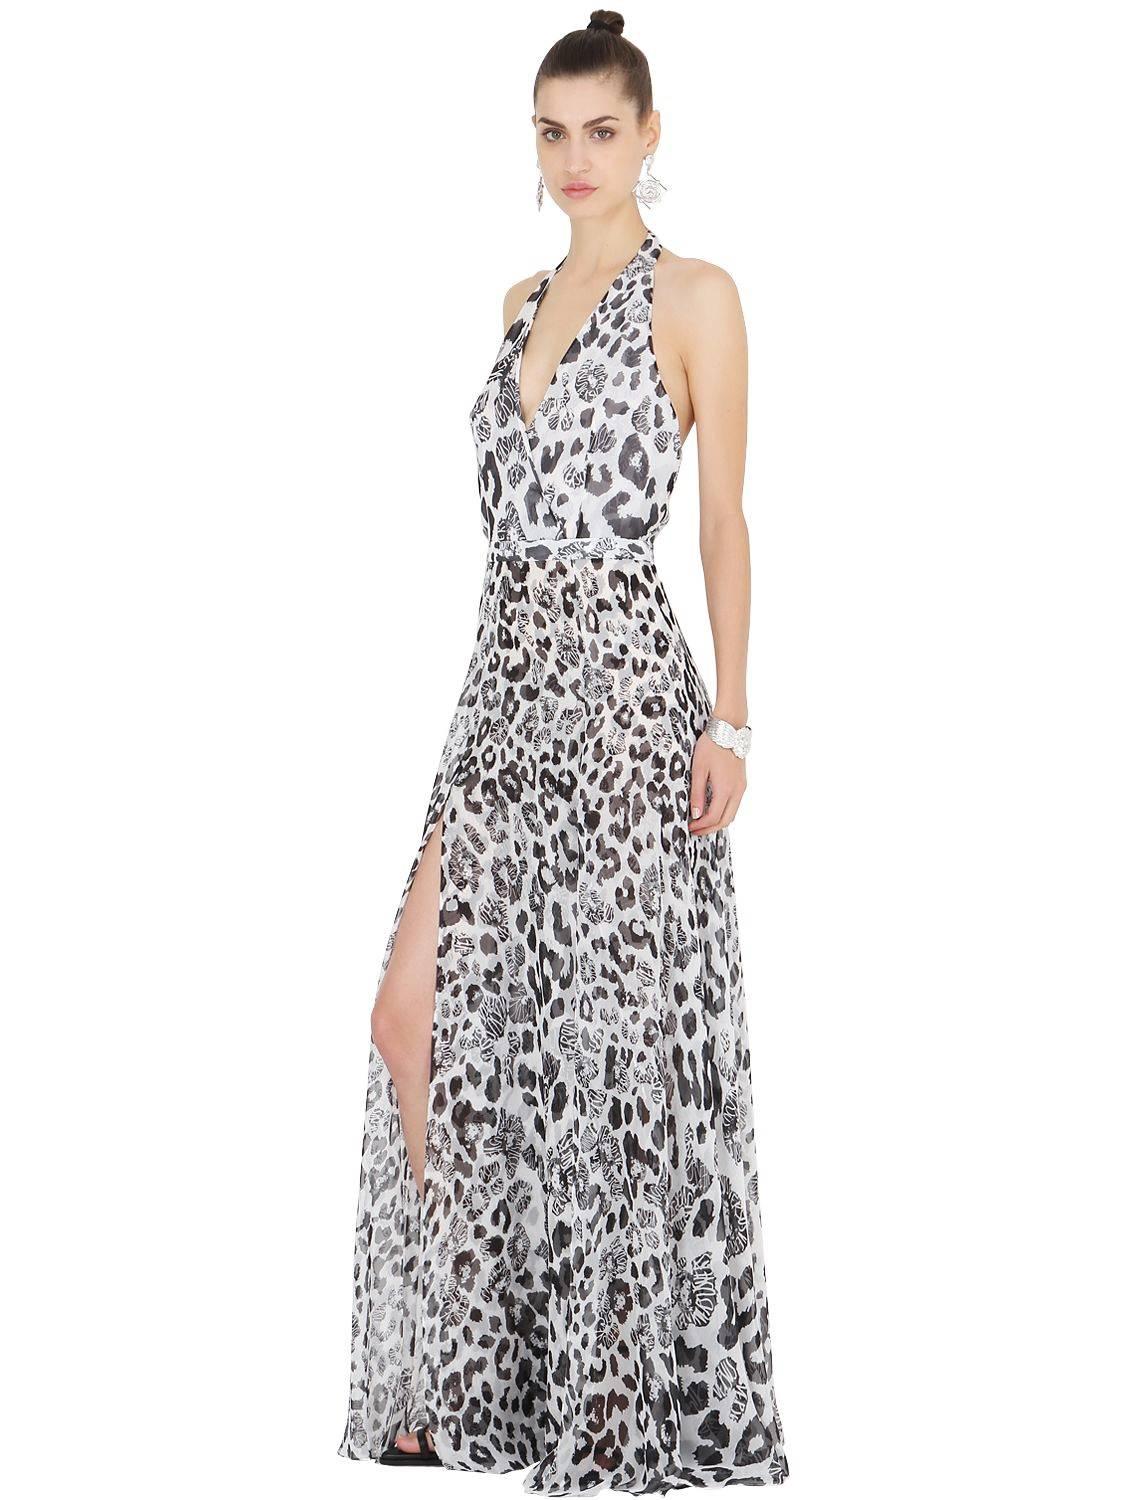 New Versus by Versace Silk Leopard Print Long Halter Dress Sexy High Slits It 38 In New Condition For Sale In Montgomery, TX